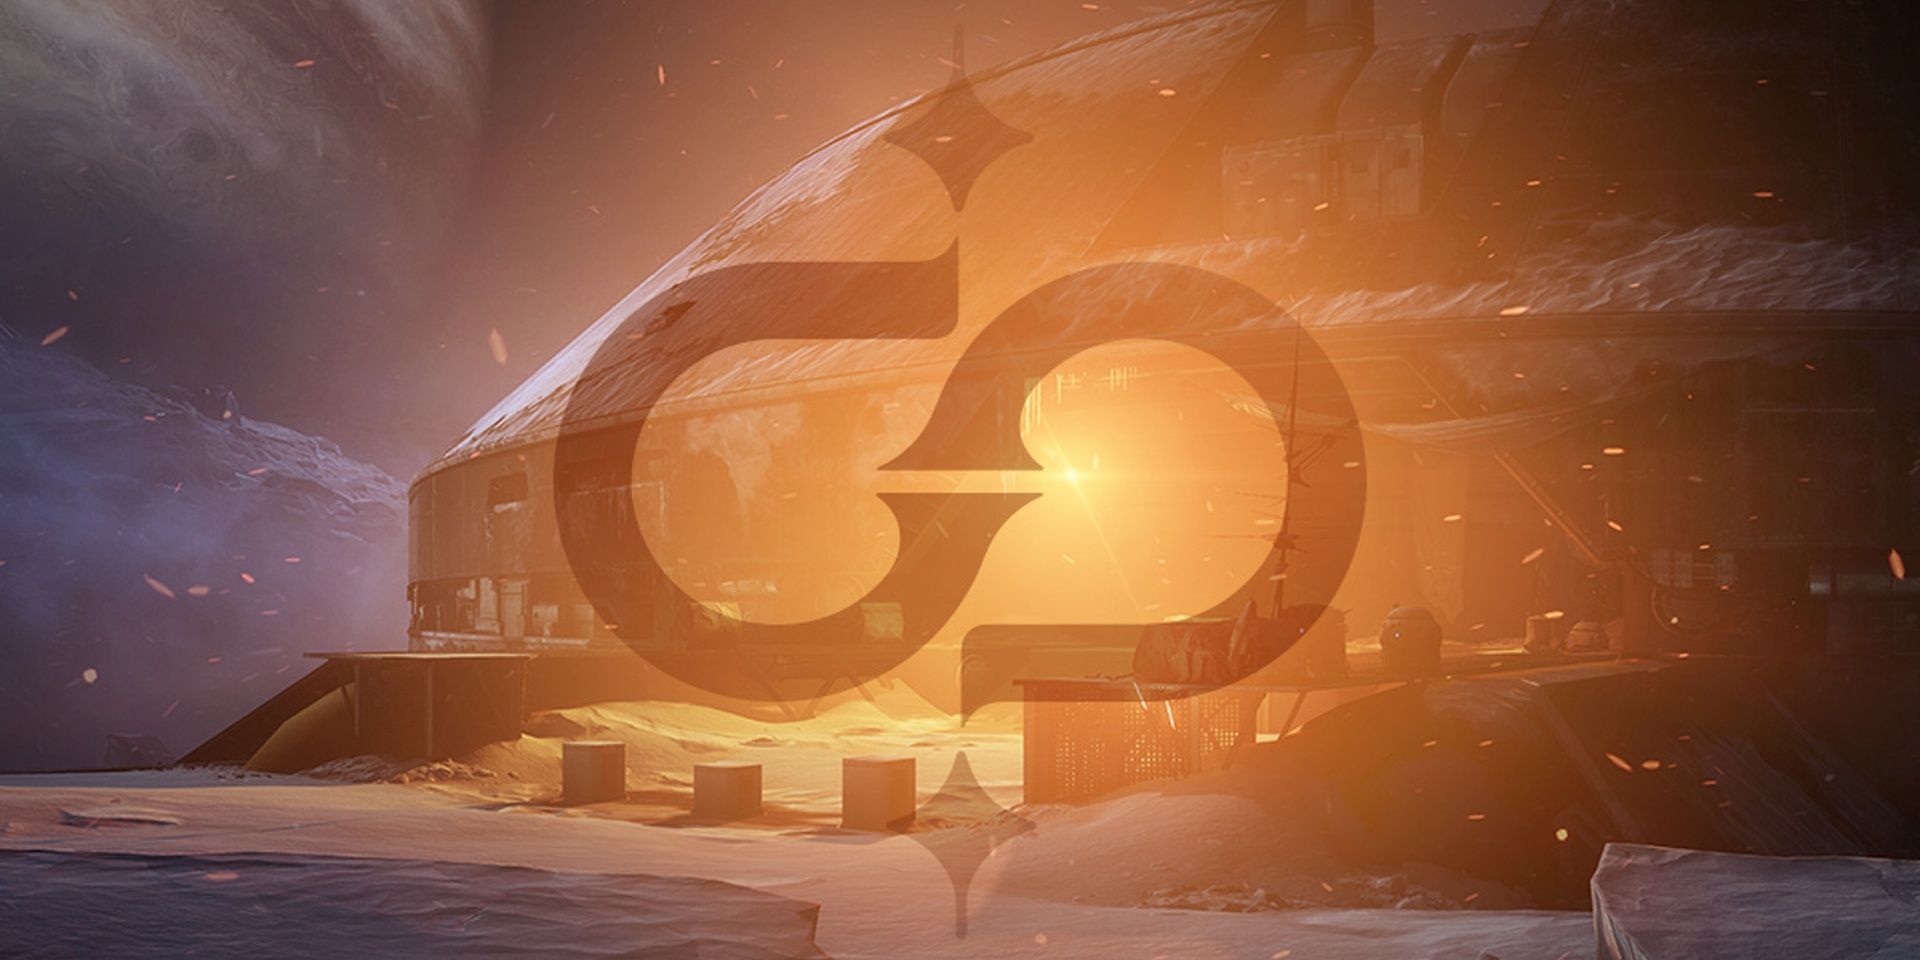 All gold Region Chest Locations in Savathun's Throne World - Destiny 2 -  Pro Game Guides